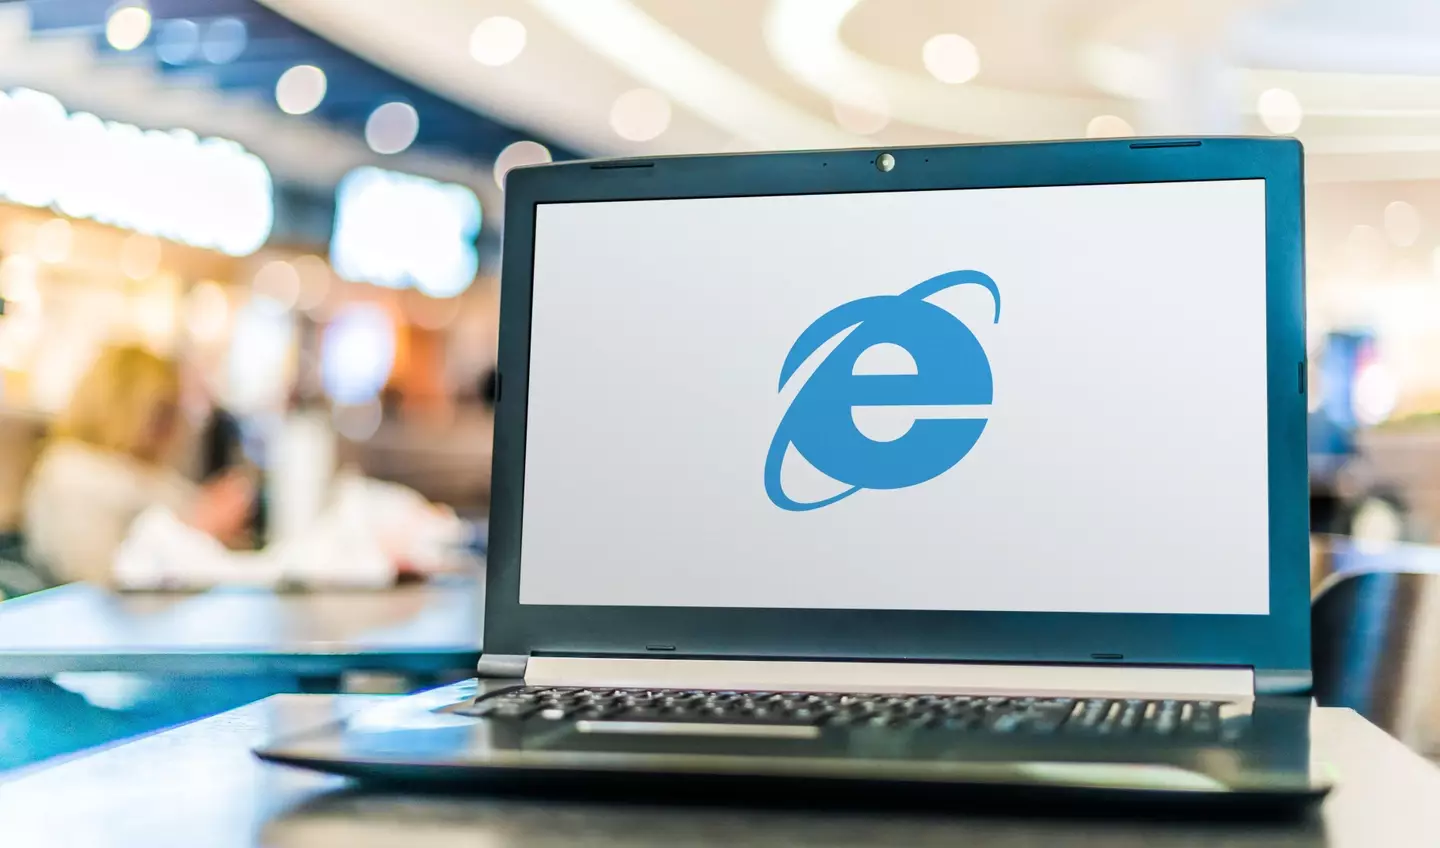 Internet Explorer has since been replaced by Microsoft Edge.